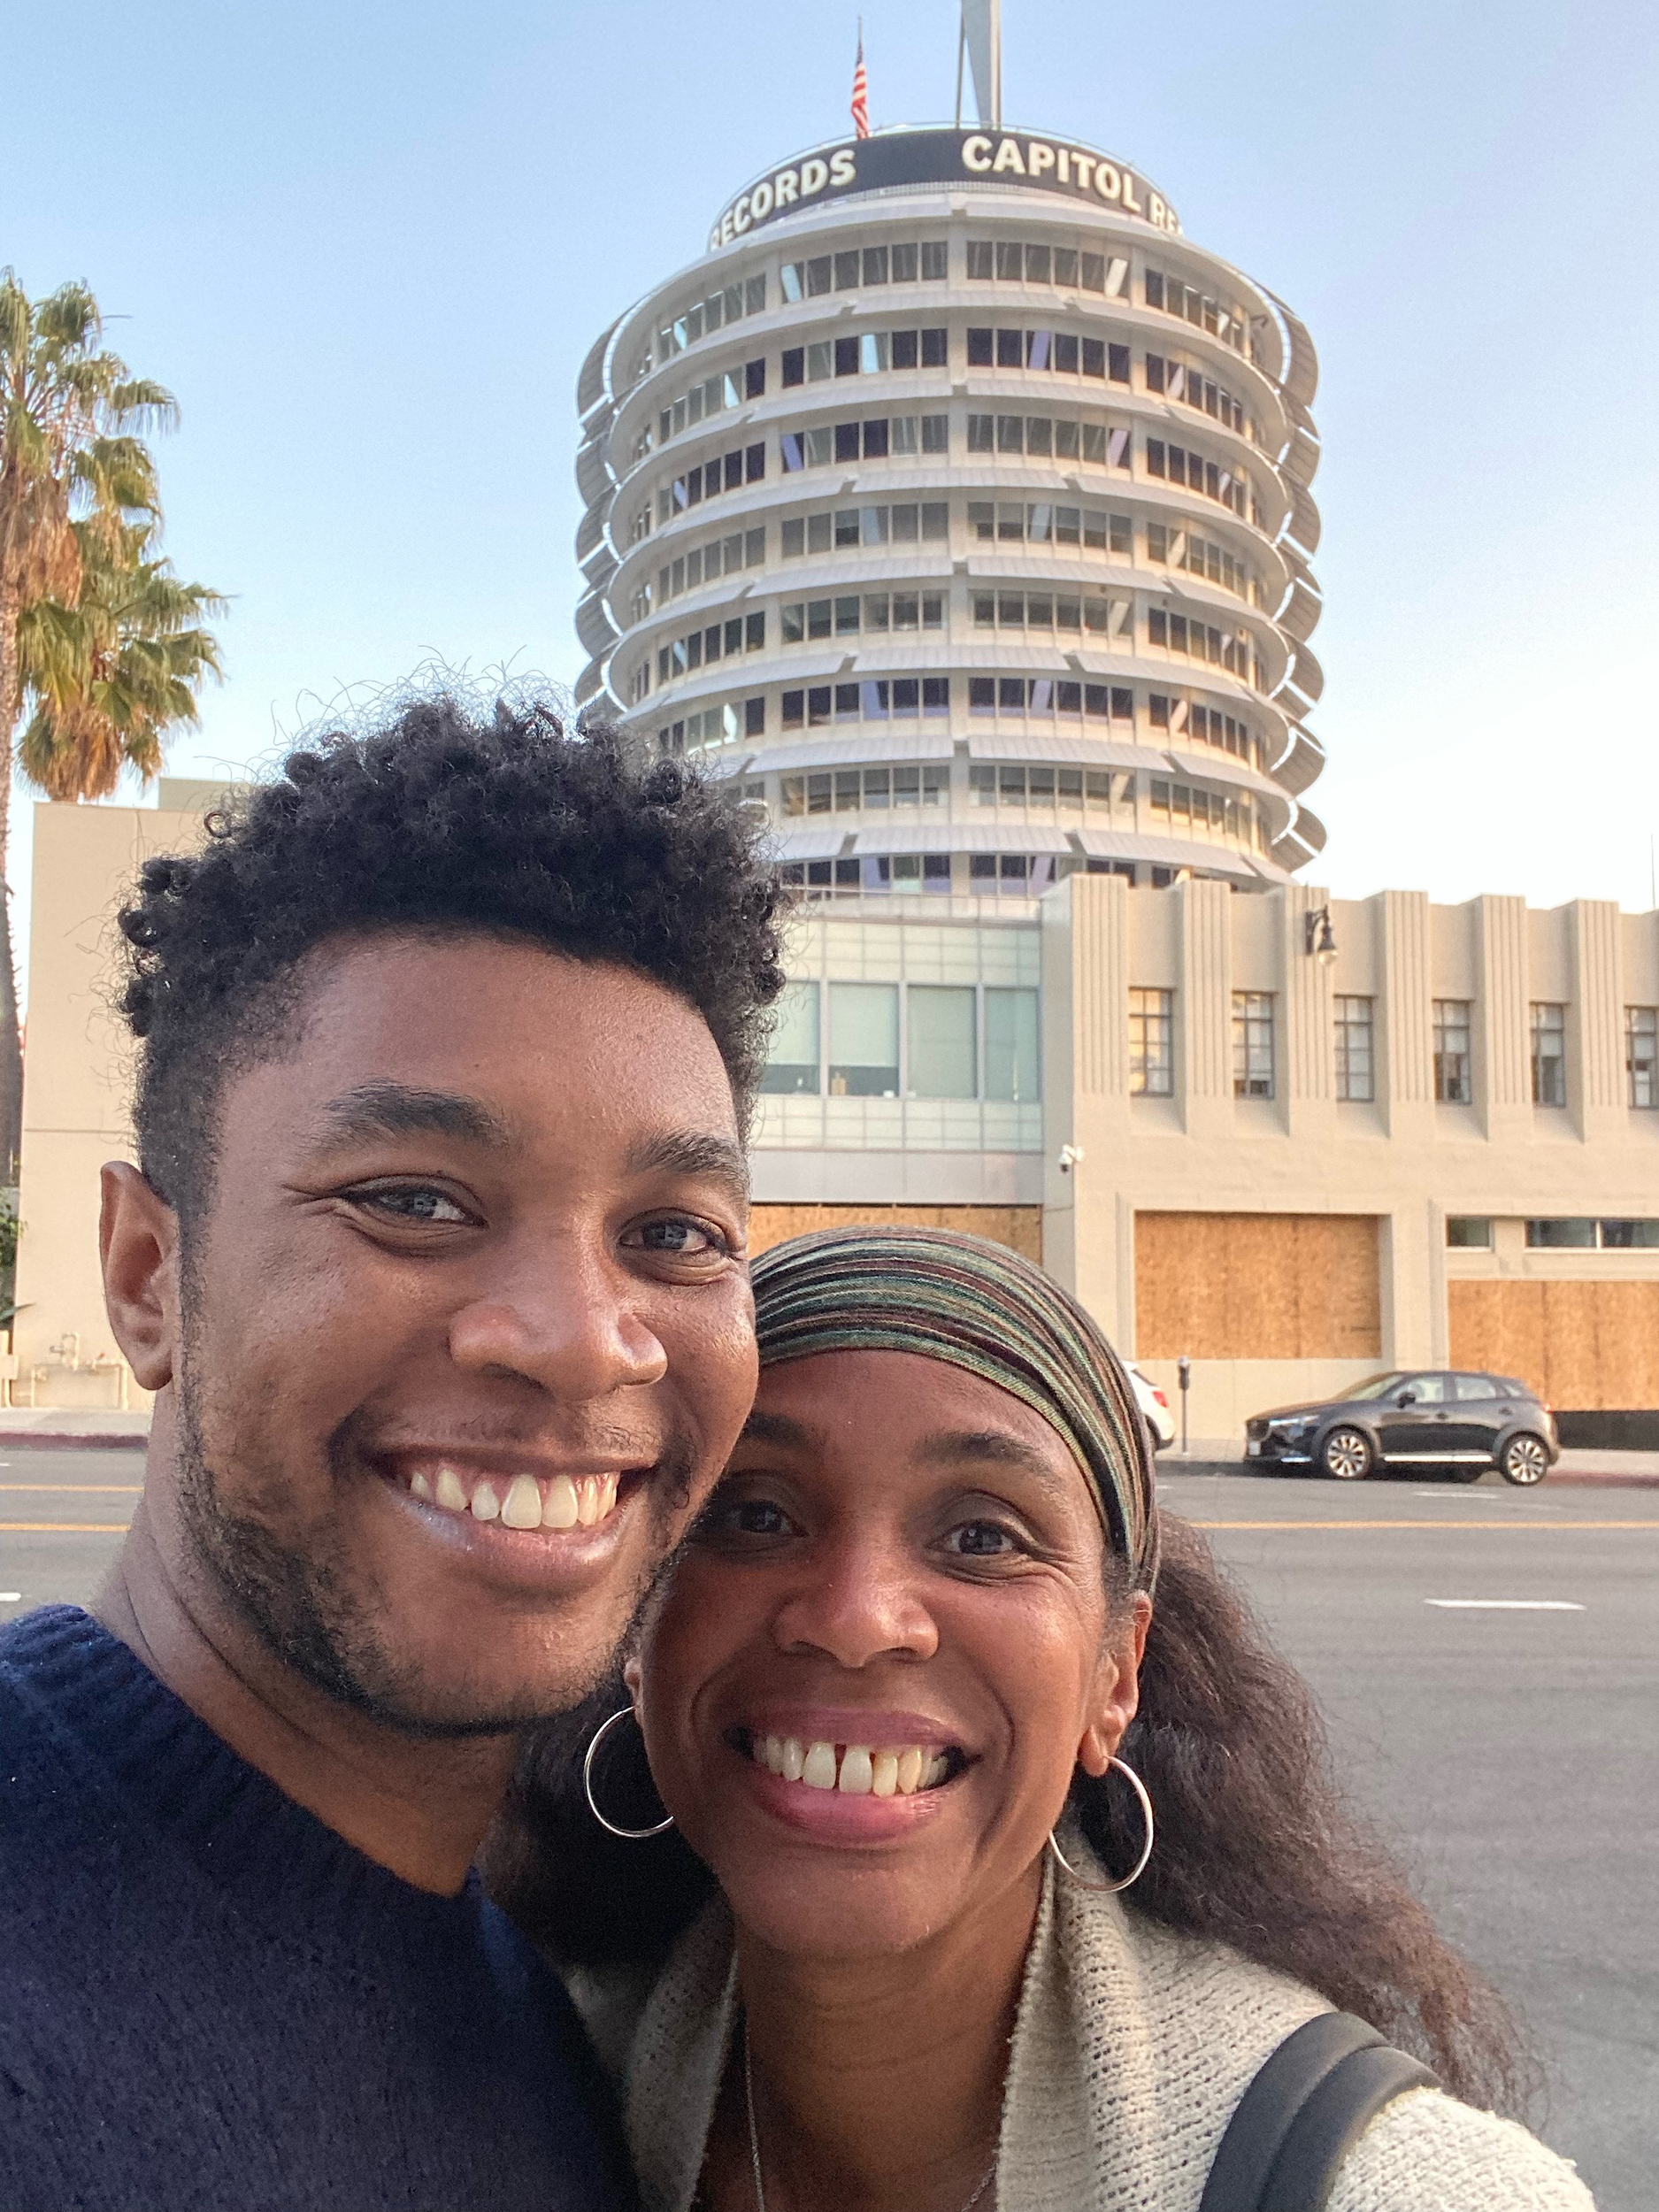 A selfie of a young man and his mother smiling and in an embrace, standing in front of the Capitol Records building in Hollywood.